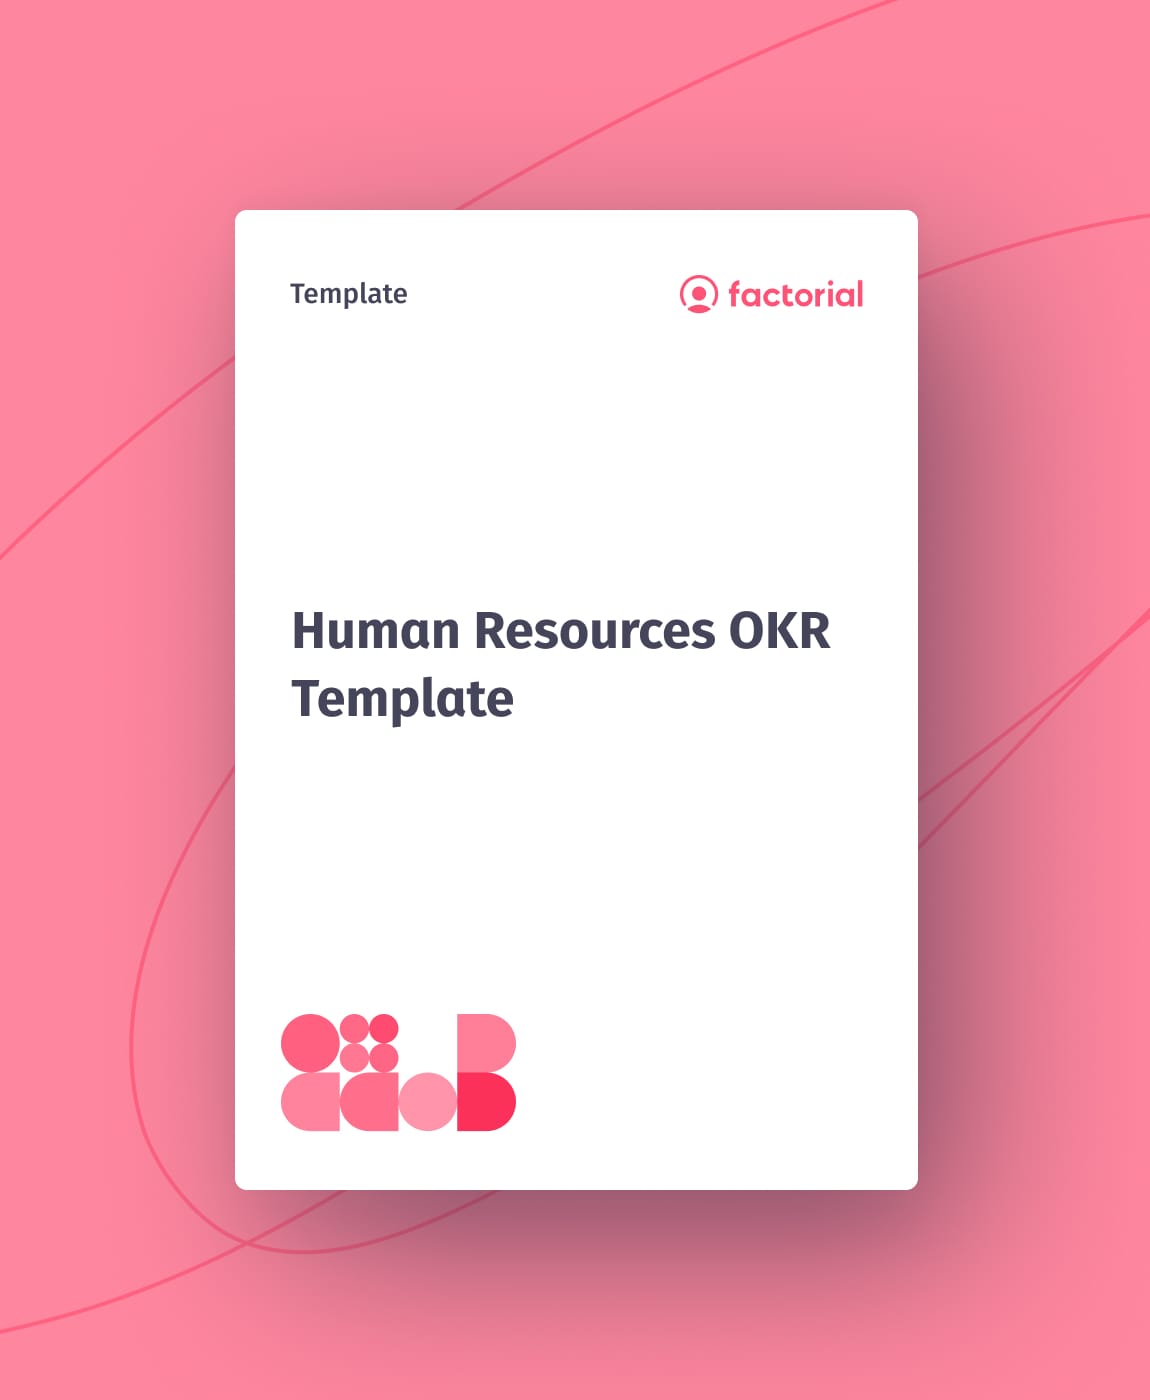 Human Resources OKR Template